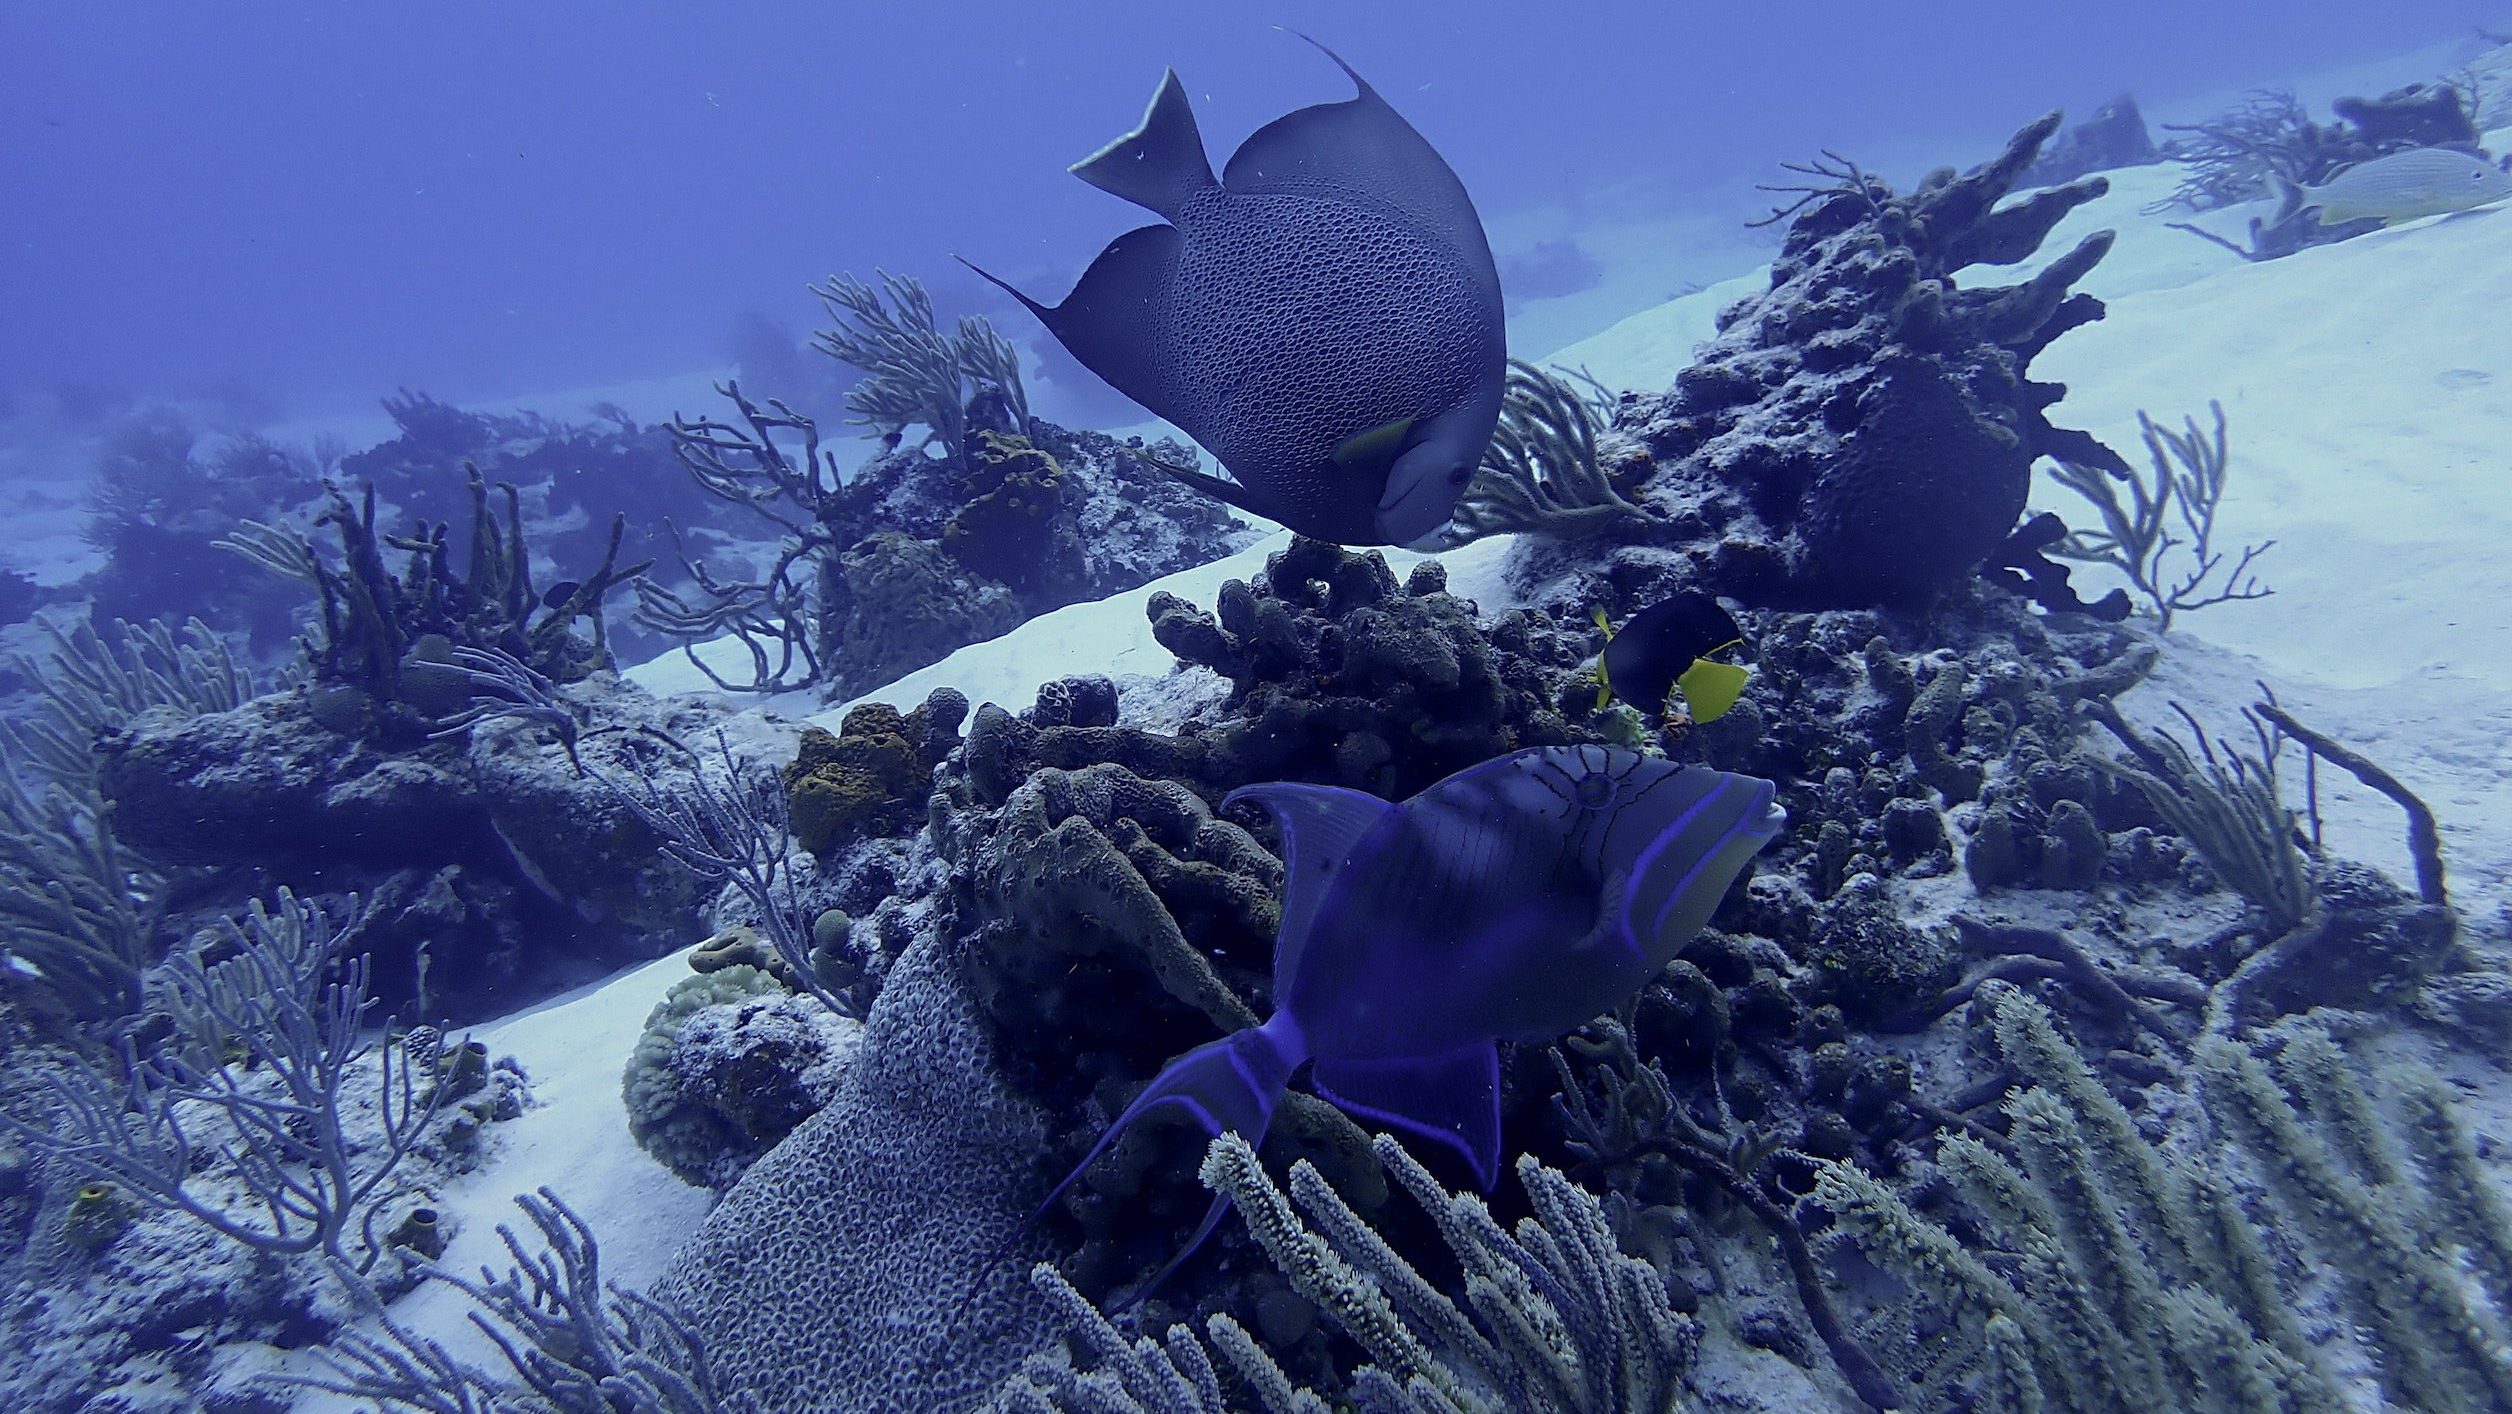 Underwater photo of triggerfish and angelfish on coral reef in Cozumel, Mexico.